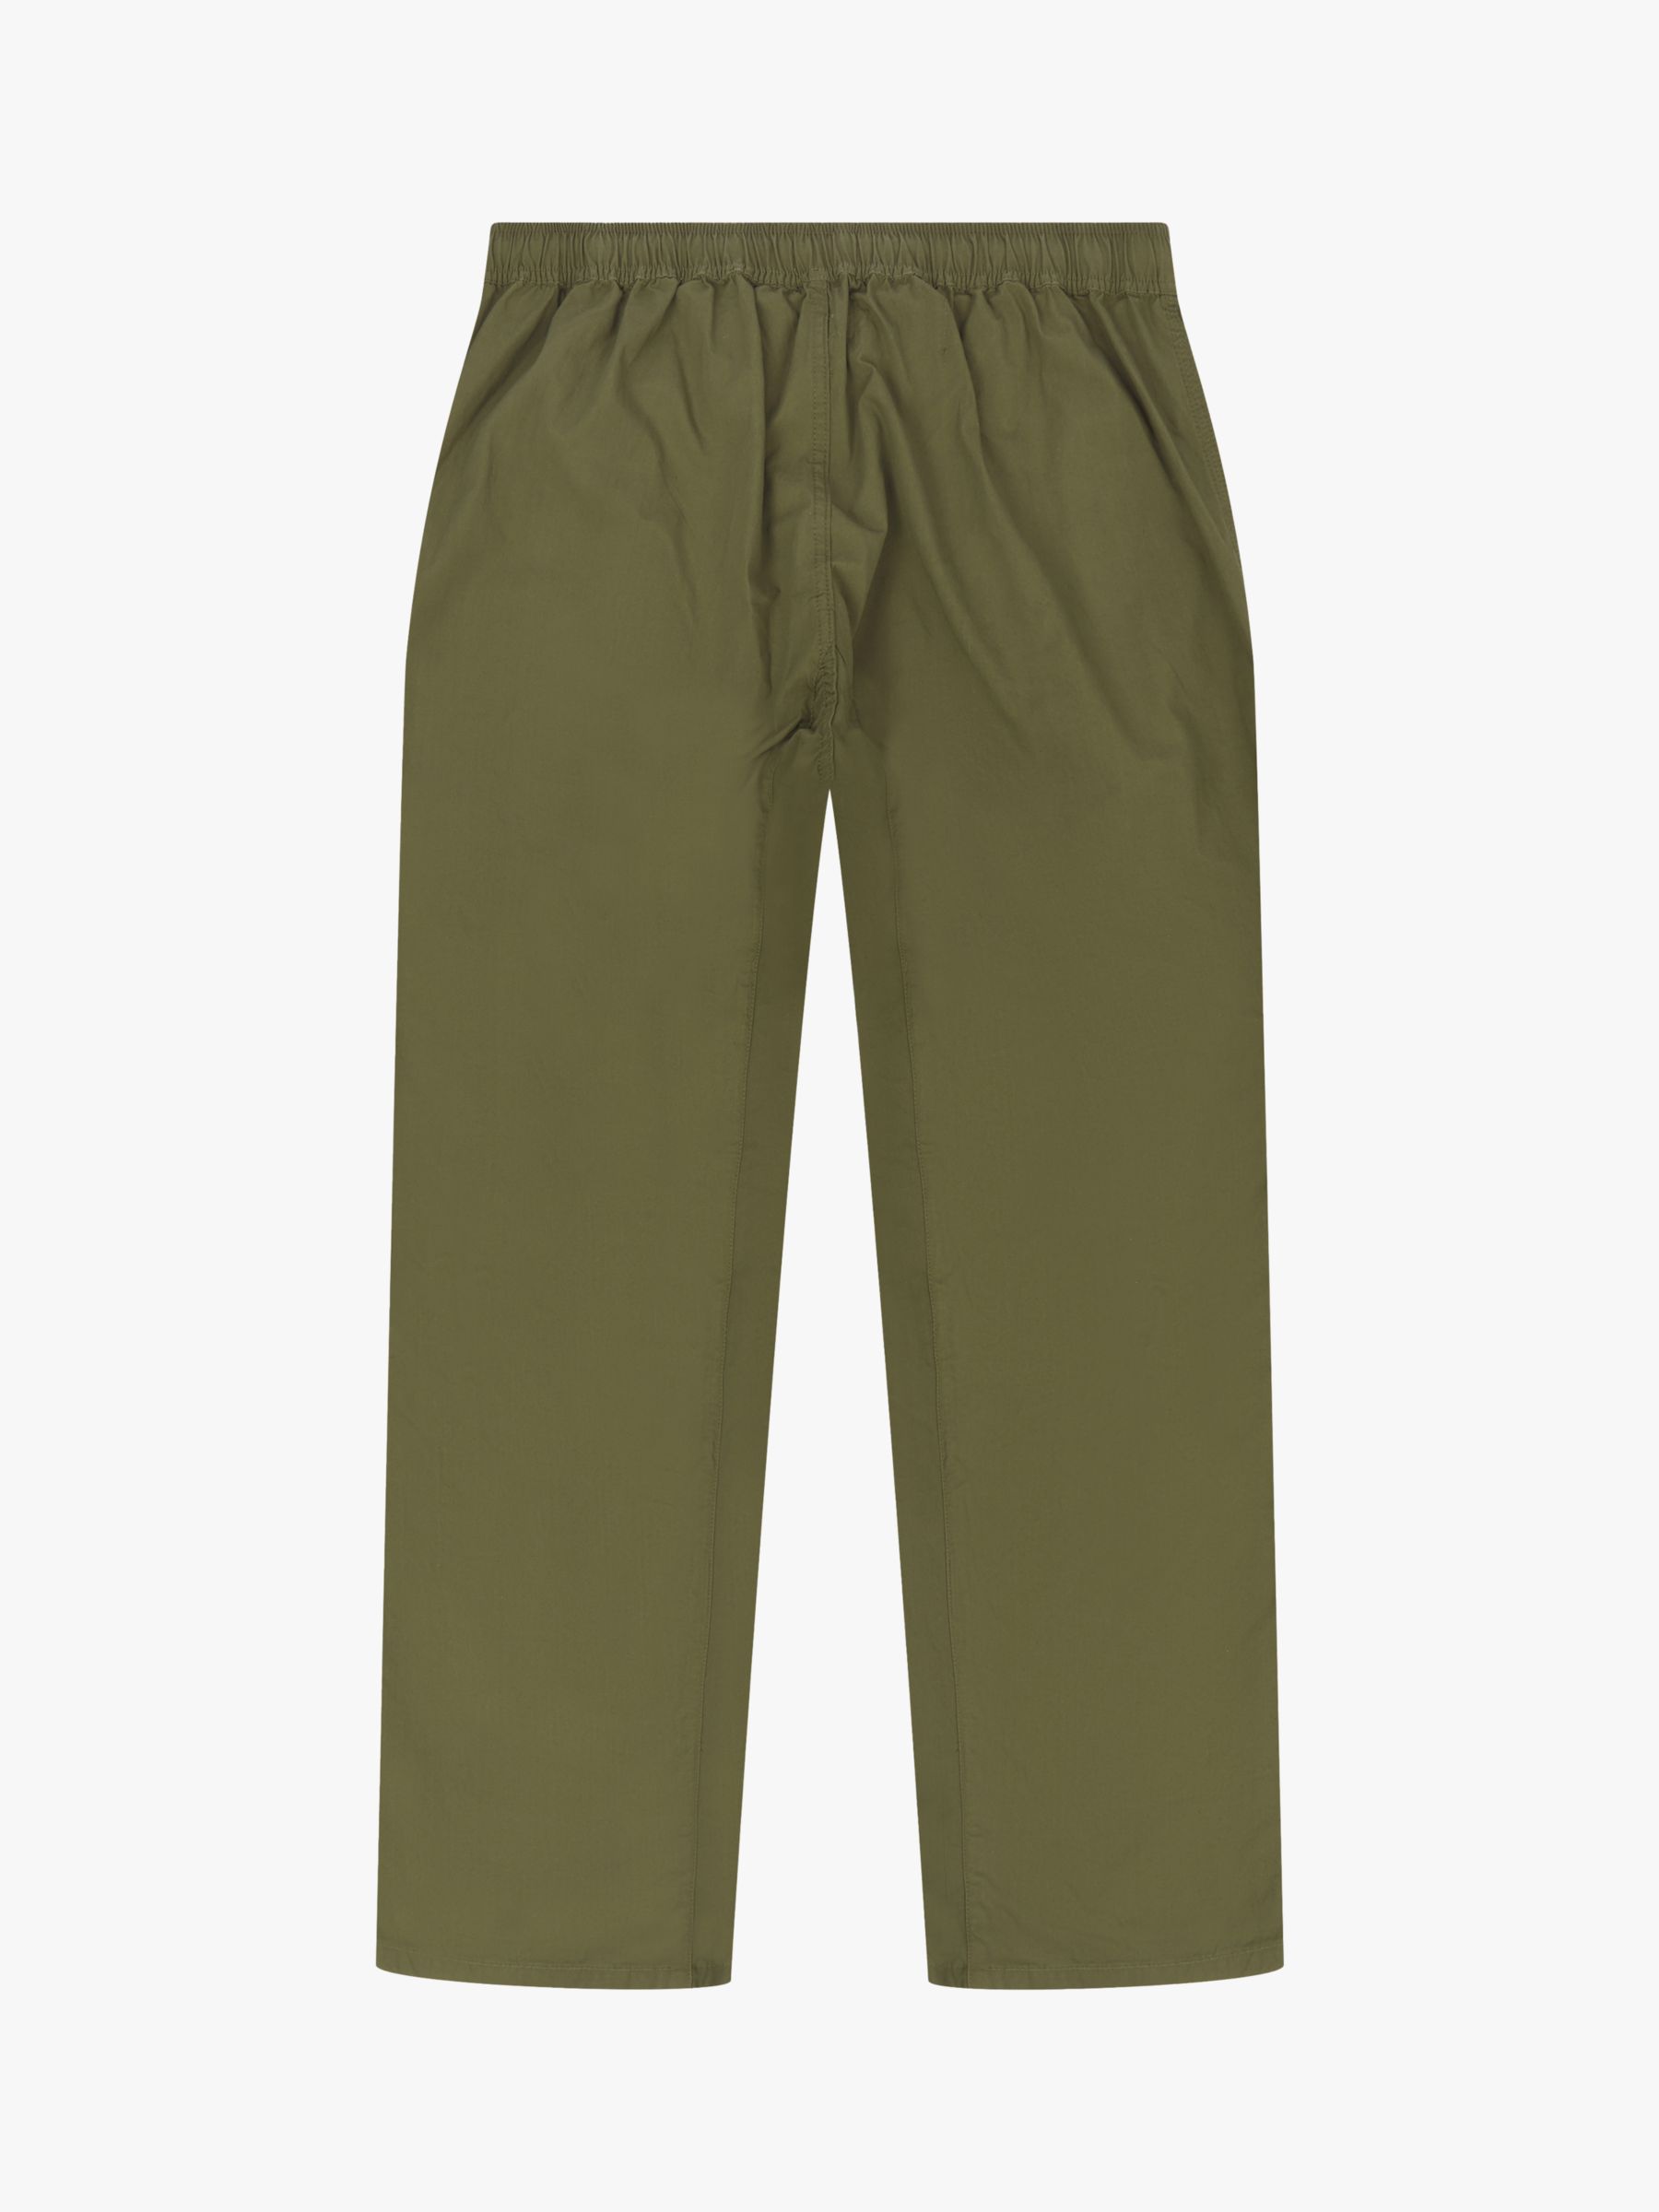 Buy Uskees Lightweight Trousers, Olive Online at johnlewis.com